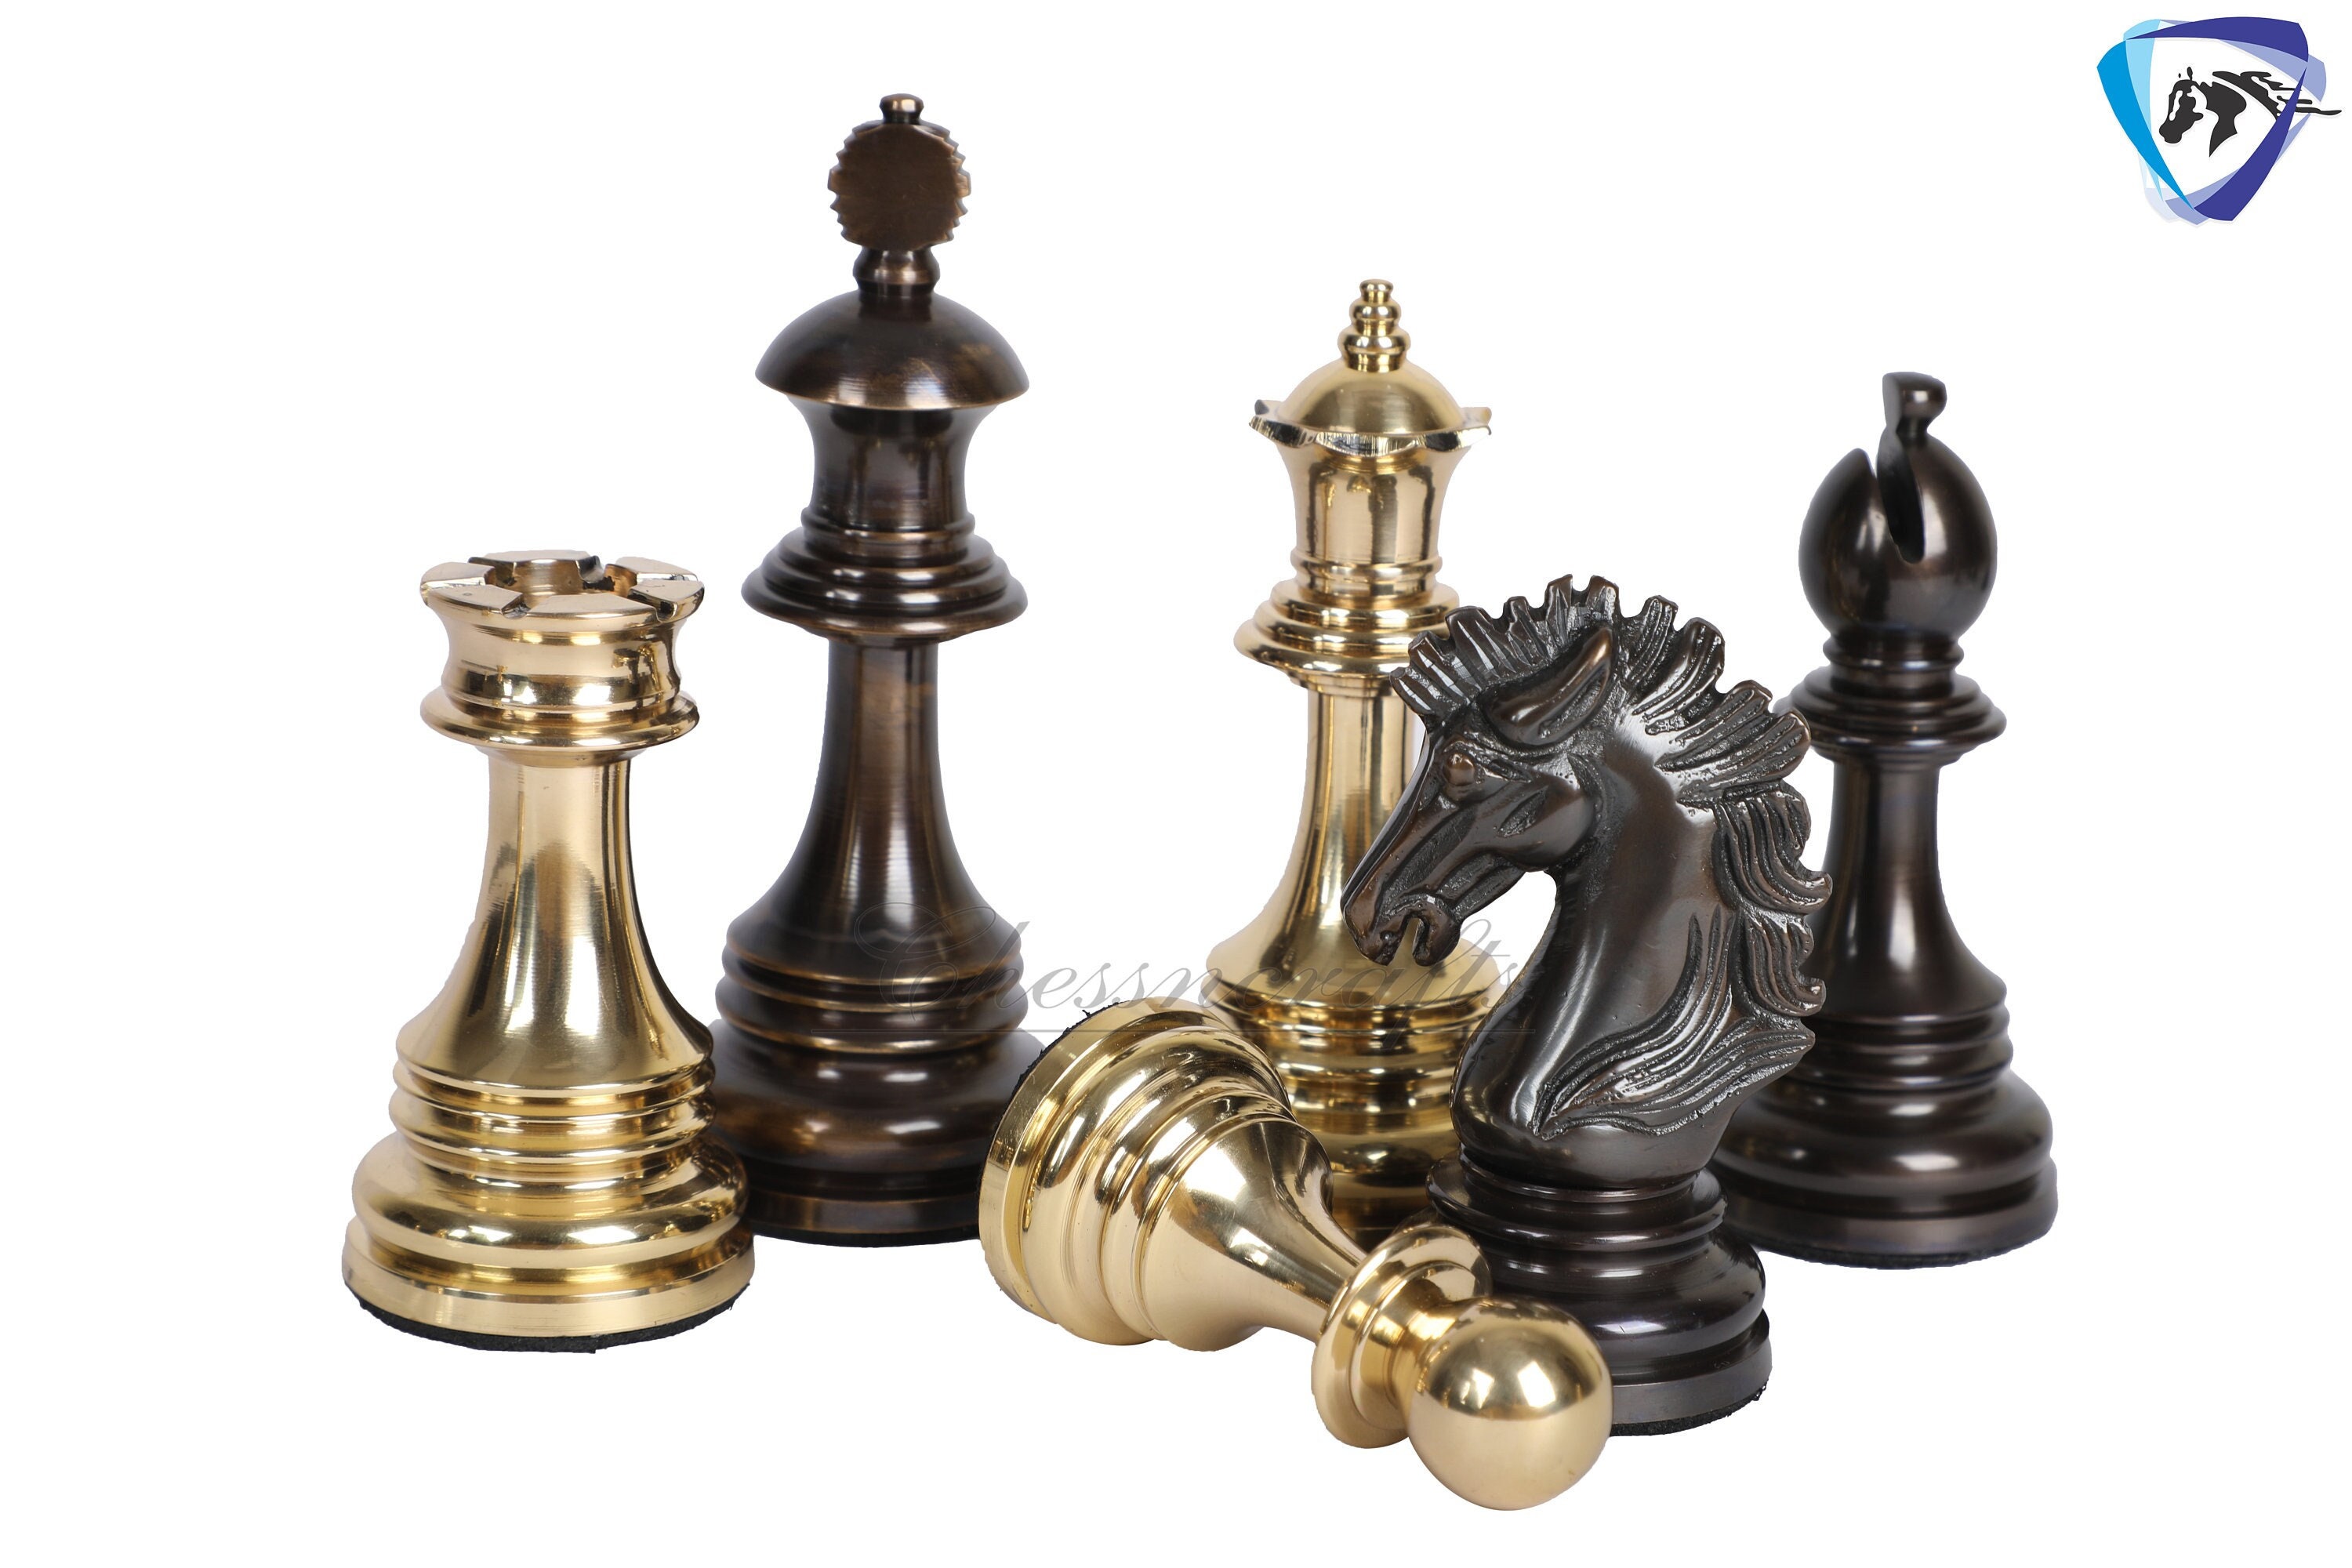 Collectible Premium Metal solid Brass Large Chess board set for